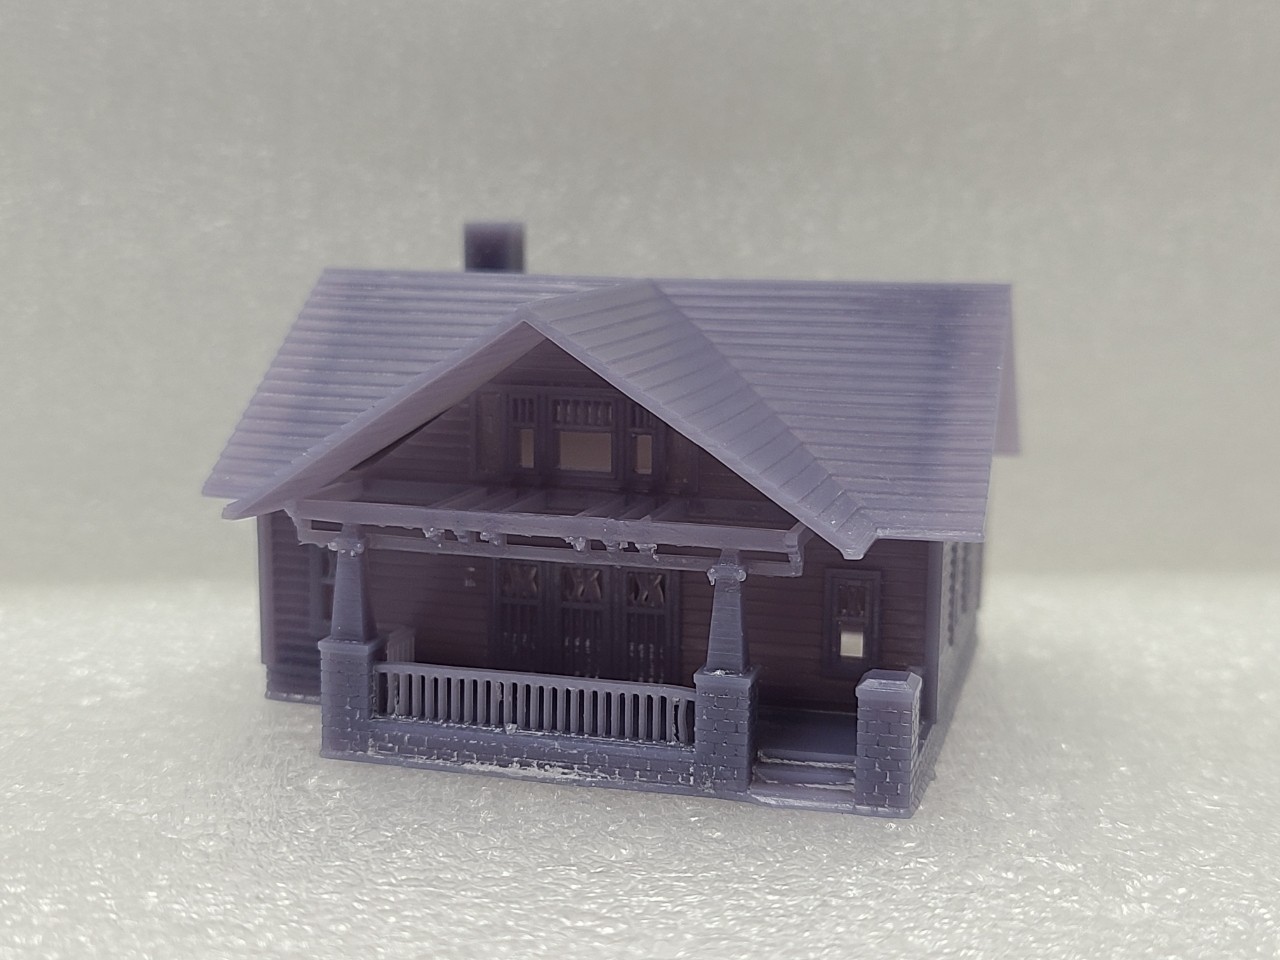 N Scale "The Uriel"  Model House Kit 1:160 Single Story with Porch 